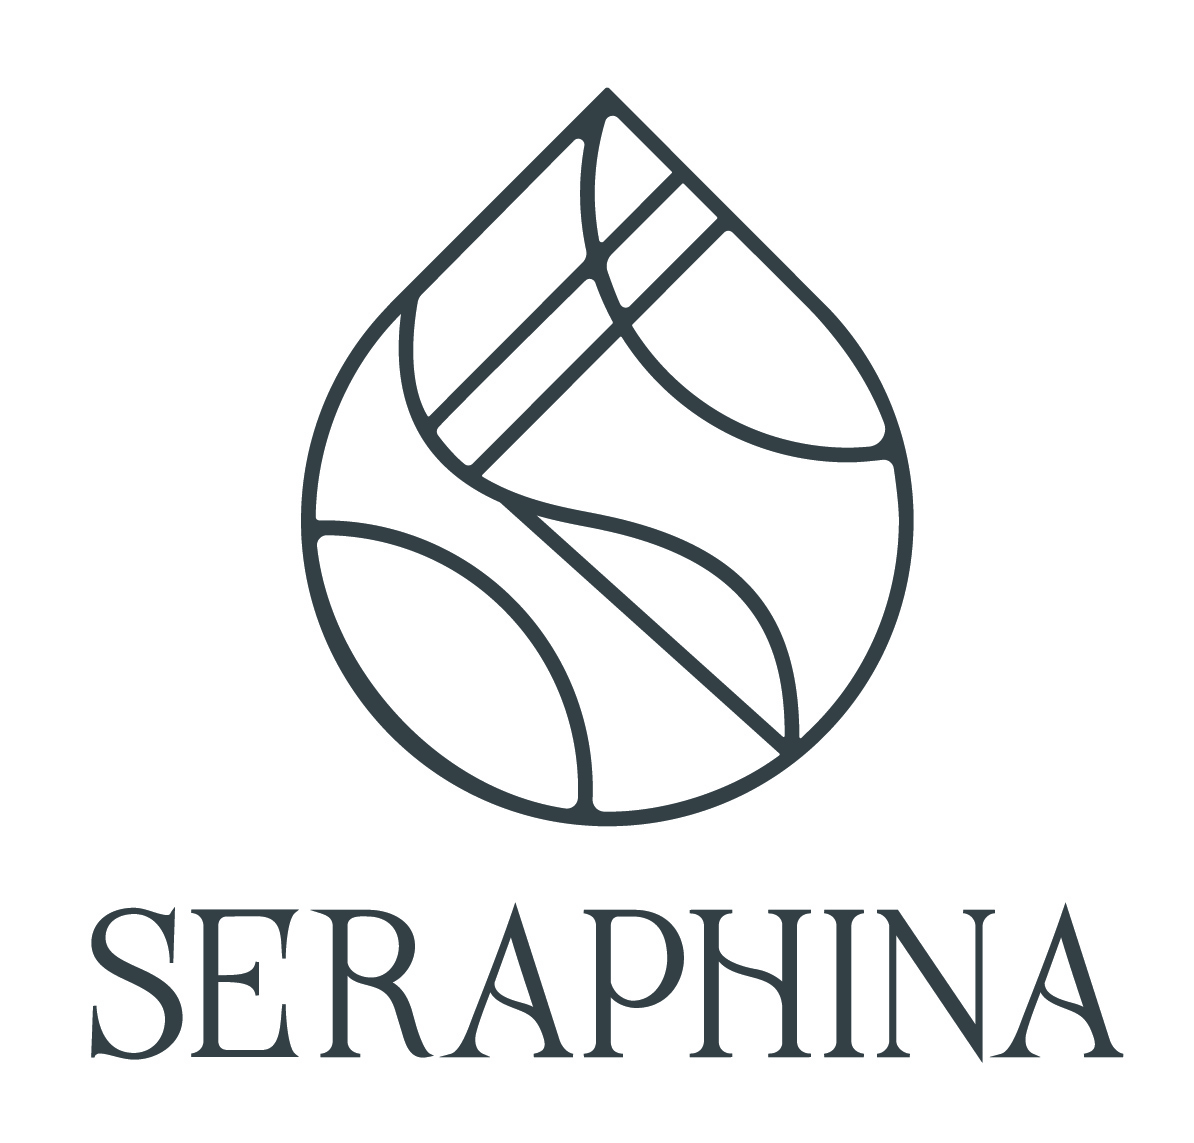 Seraphina Spa at the JW Marriott